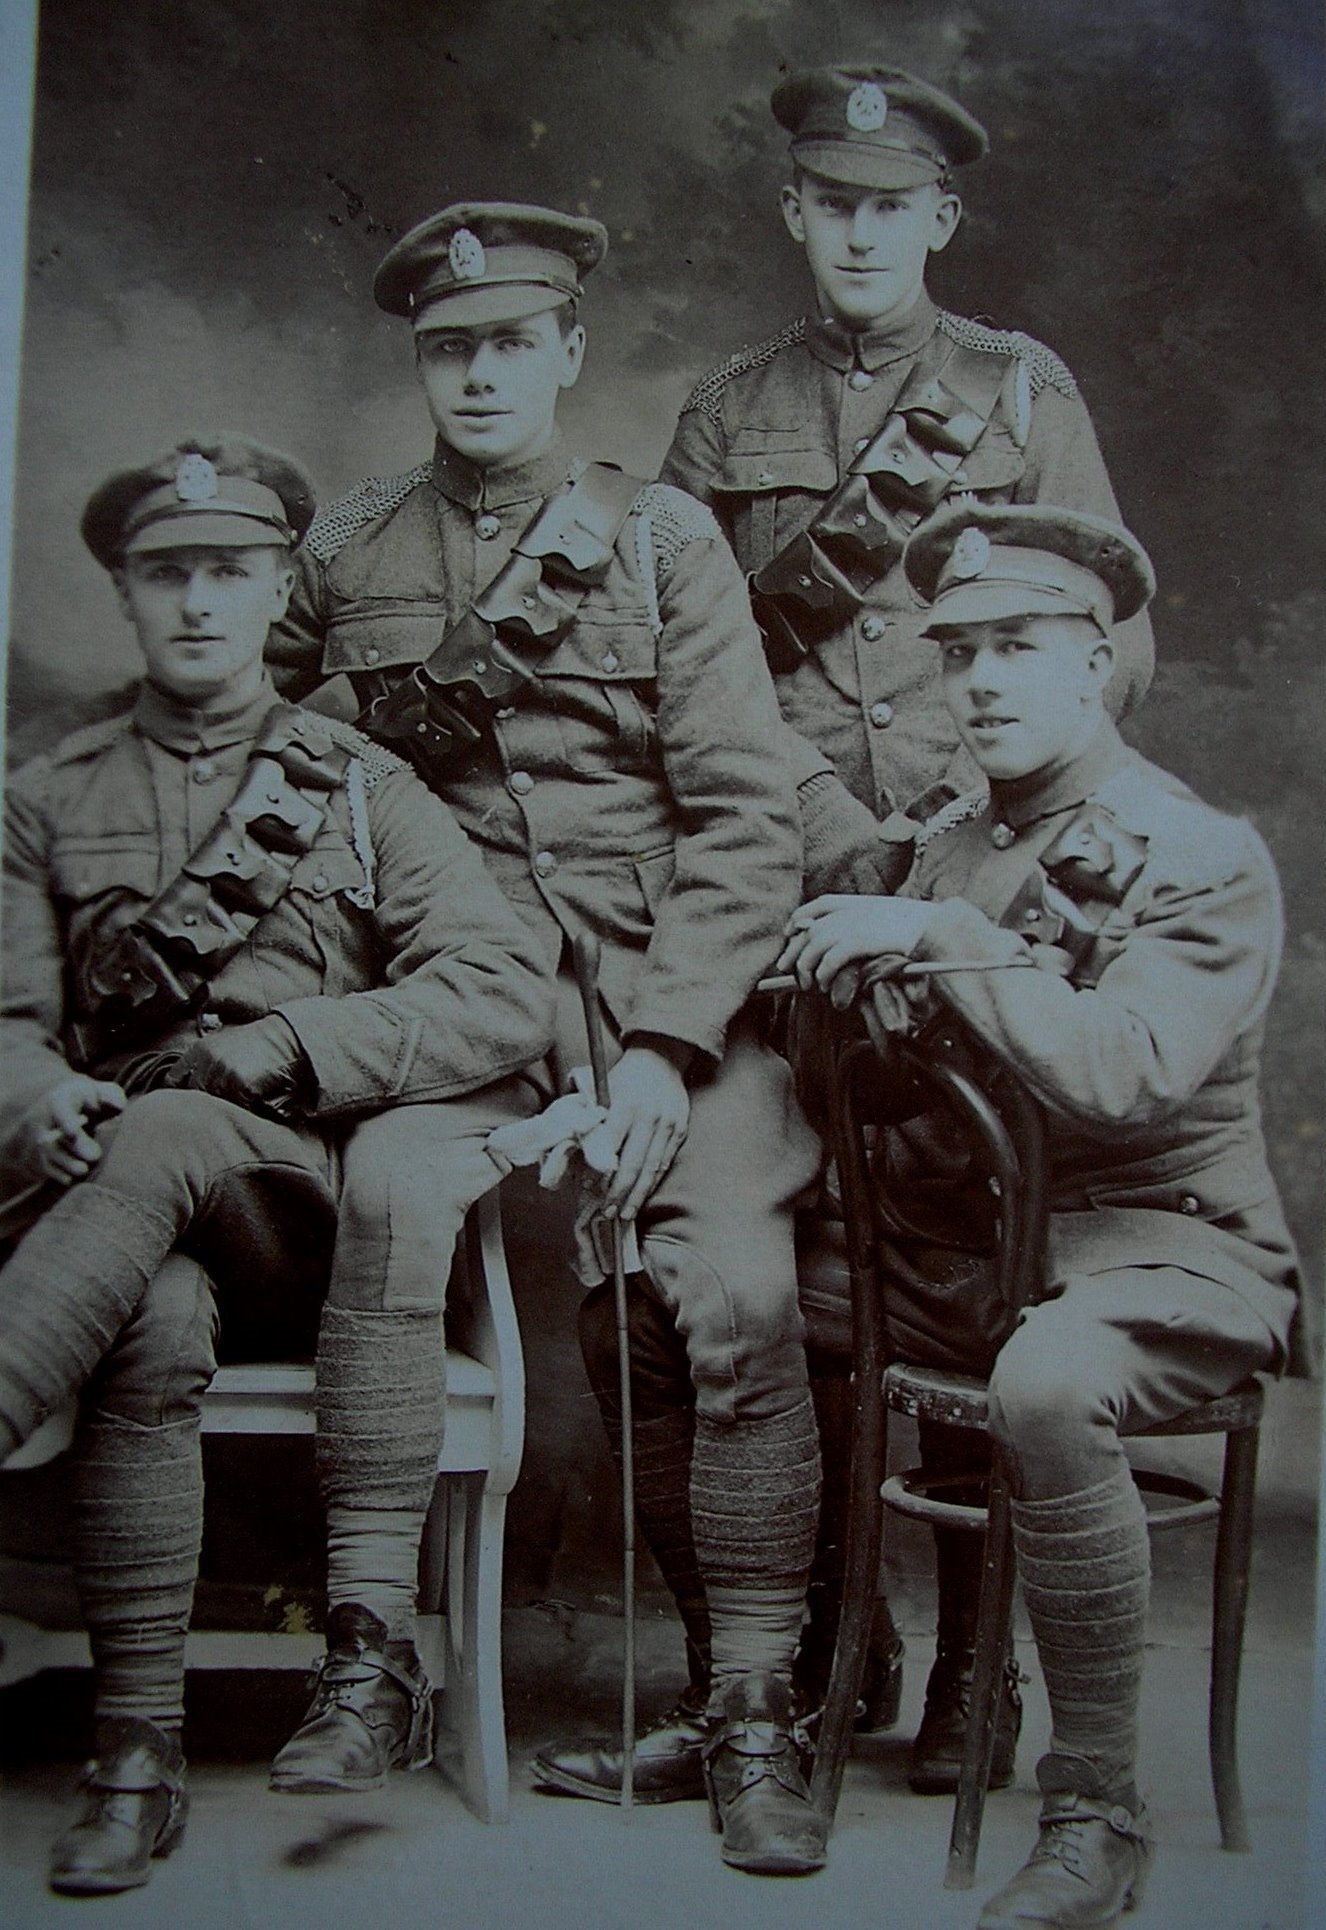 Privates Ford, Paul Bernard Poulain, Ernest Gordon Saunders and an un-named Private (left to right) of 2nd King Edward’s Horse in Service Dress in Ireland in 1917. They are wearing shoulder chains, white lanyards around their left shoulders, cloth leggings and 1903 pattern leather webbing. Their headdress badges are that of the 2nd King Edward’s Horse as are their shoulder titles. Private Ford is wearing a good conduct stripe on his left forearm (Photograph courtesy of the Simon Jervis collection).